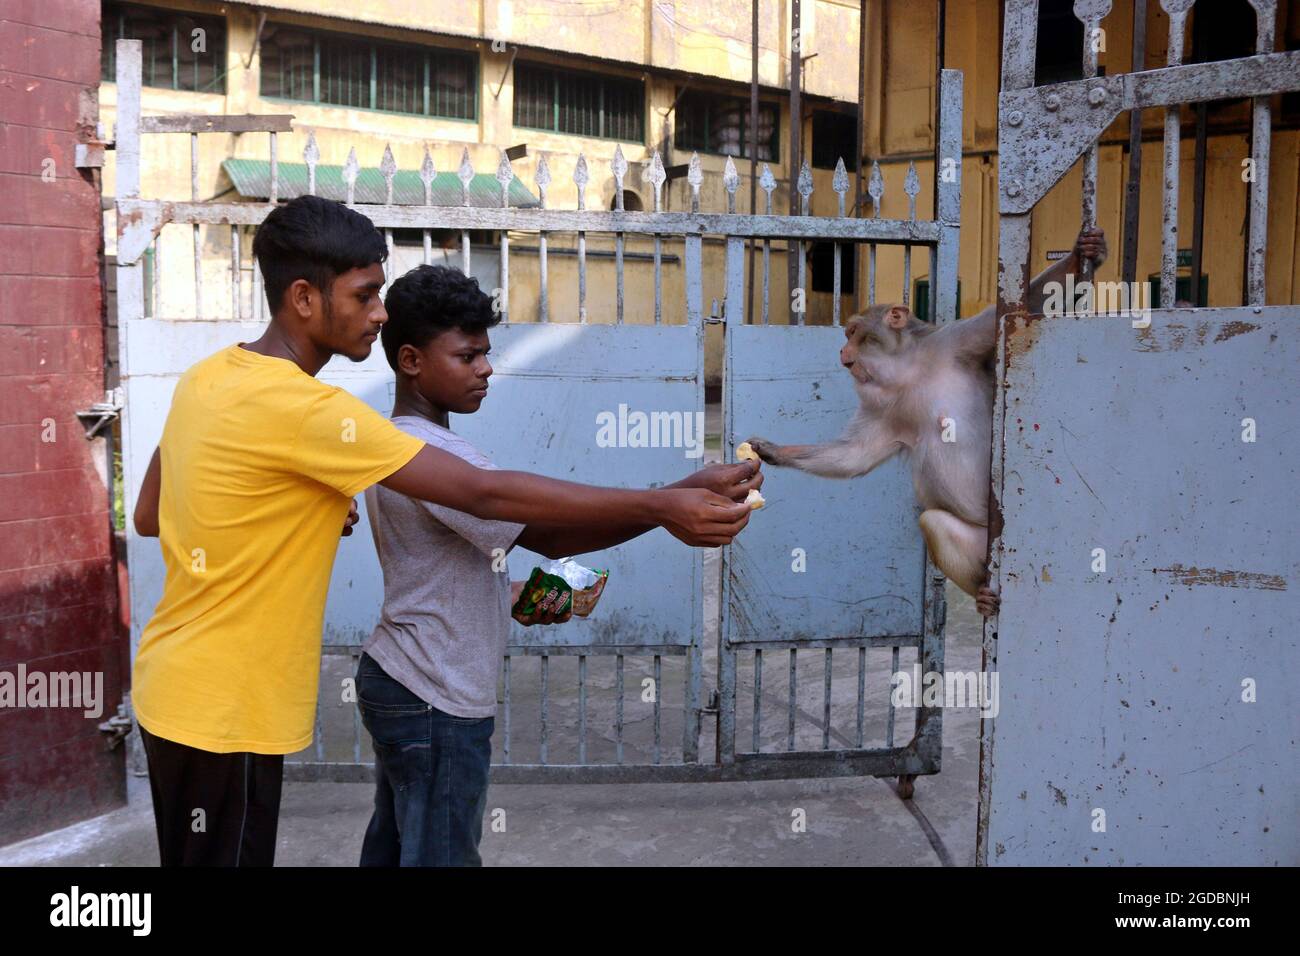 Dhaka, Bangladesh. 12th Aug, 2021. Japanese macaques are fed by a visitor, that walking on the streets of Gandaria amid Covid-19 pandemic. The Japanese macaque or red-faced macaque is a species of primate, that lives in forests and mountains, that have migrated to cities and live with humans in looking for food. on August 12, 2021 in Dhaka, Bangladesh. Photo by Habibur Rahman/Eyepix/ABACAPRESS.COM Credit: Abaca Press/Alamy Live News Stock Photo